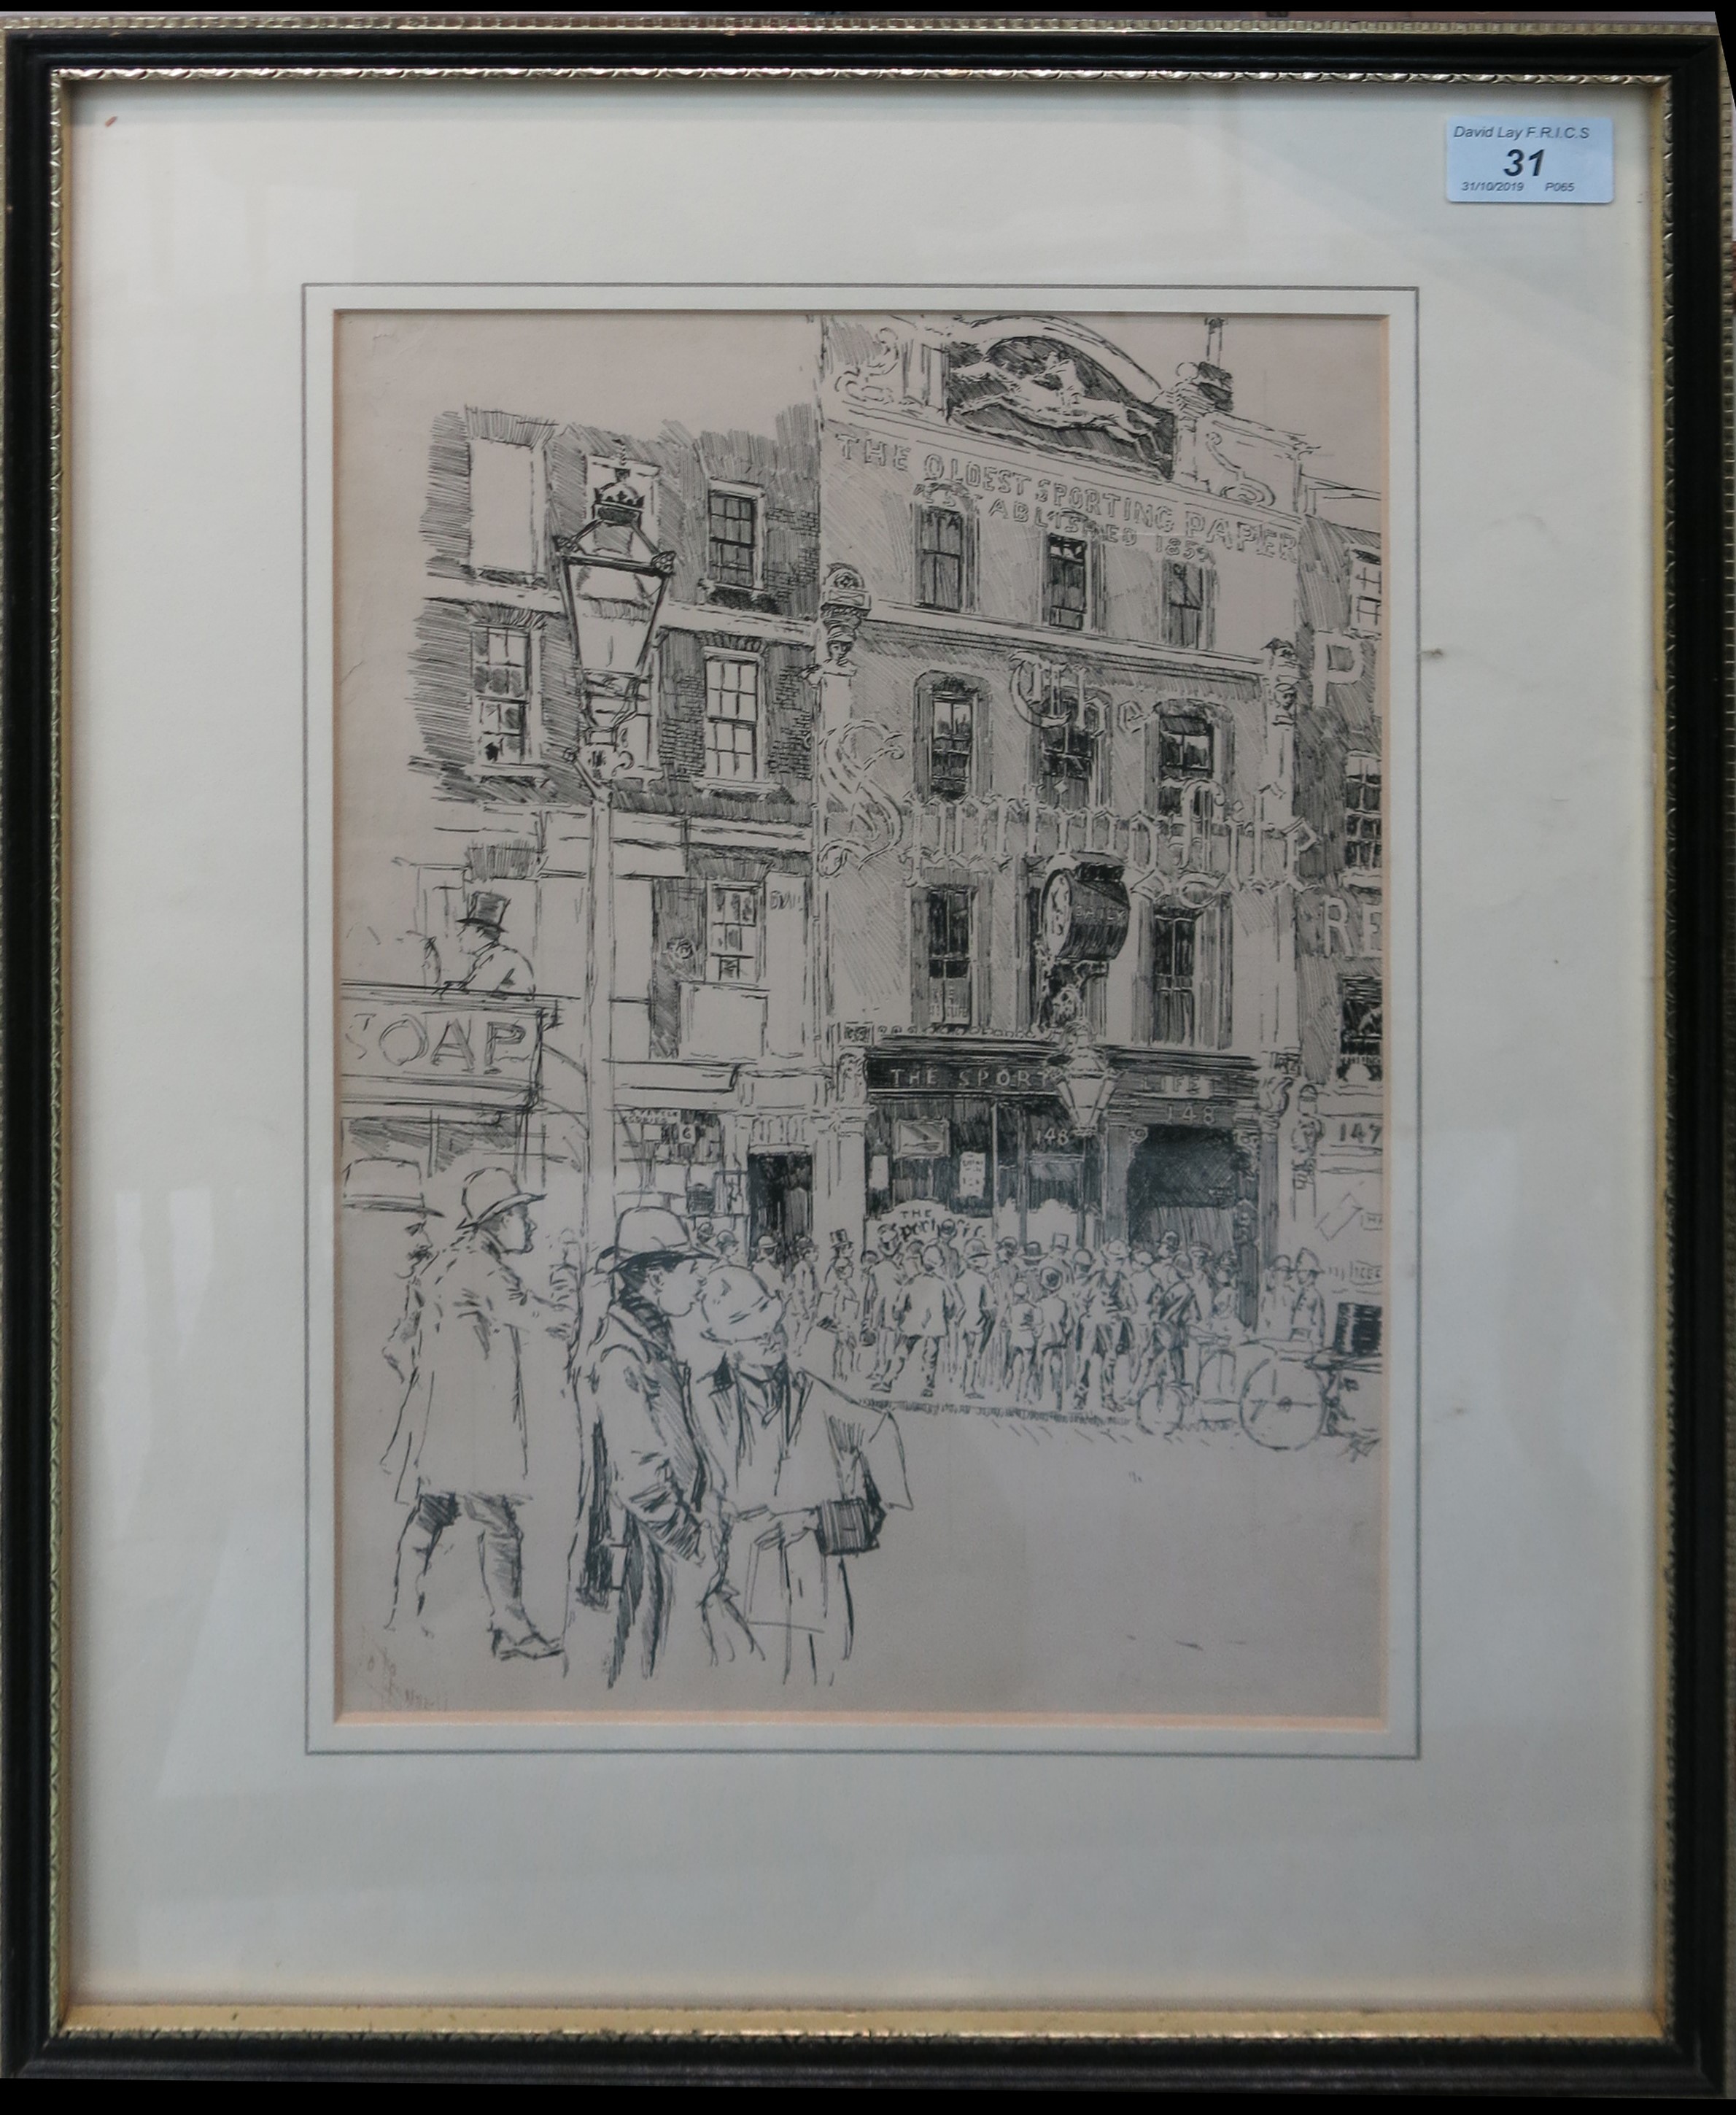 Joseph PENNELL (1858/60-1926) The Sporting Life Building, 148 Fleet Street - Image 3 of 4